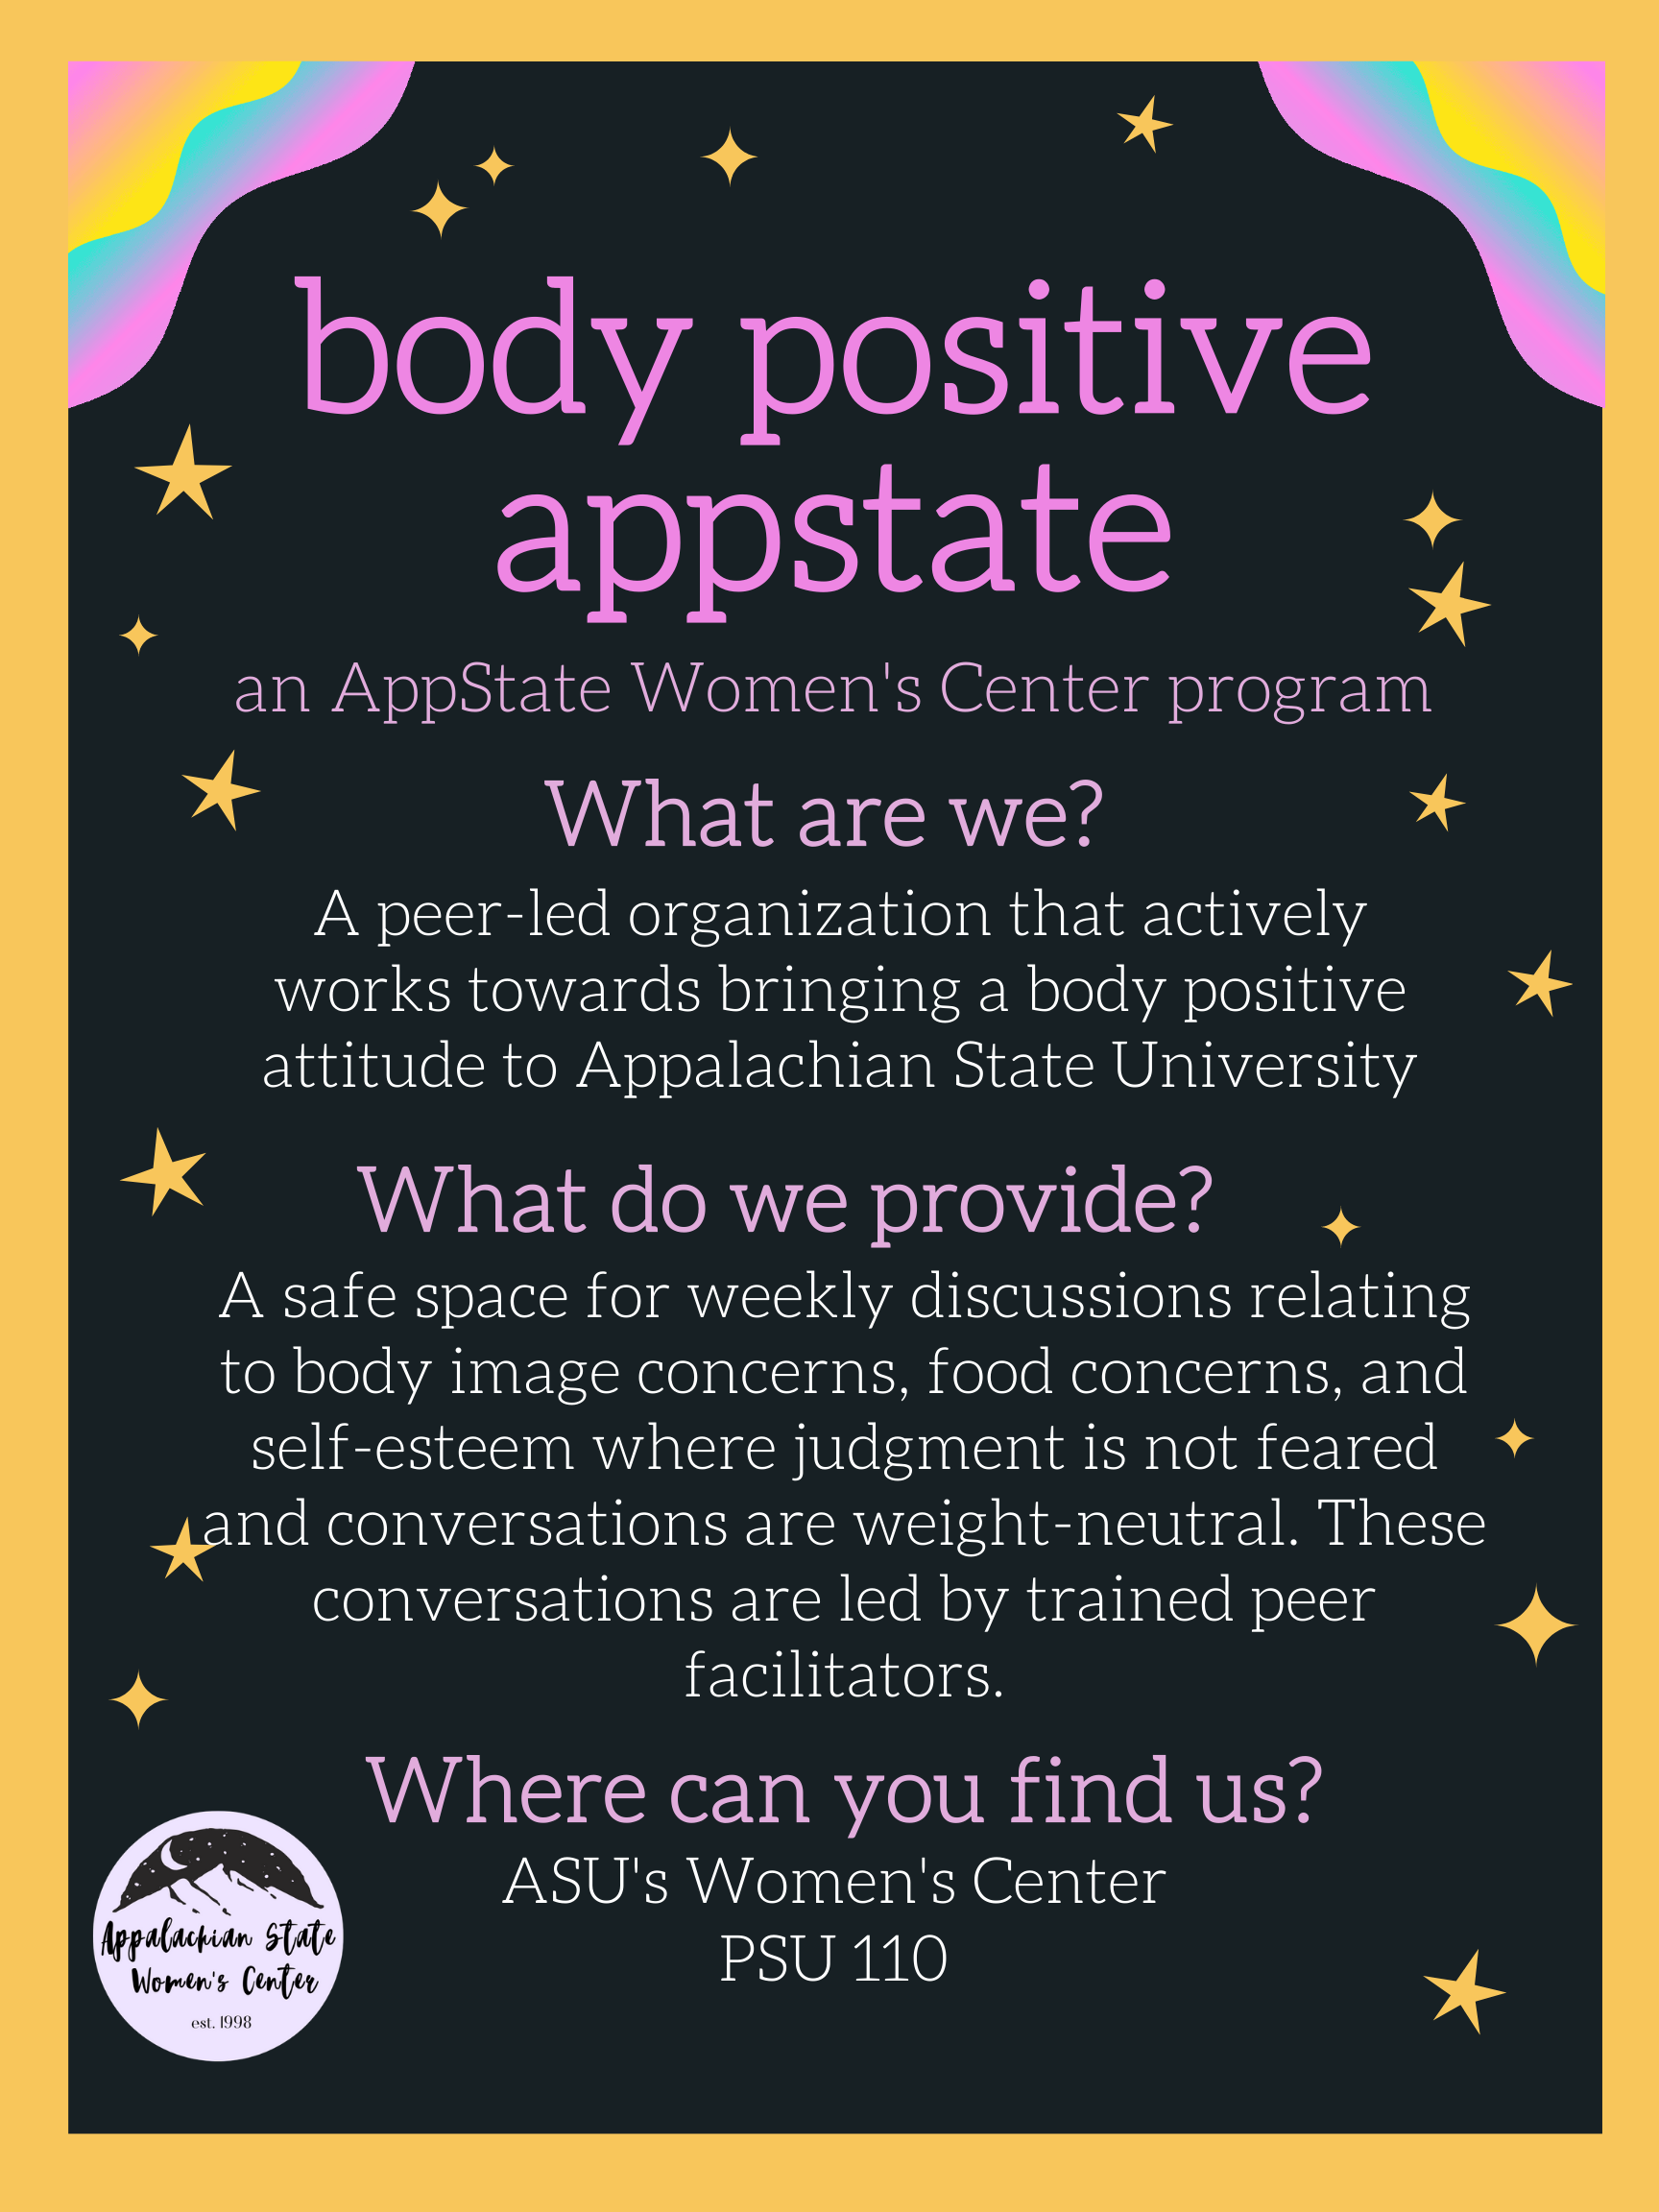 An AppState Women's Center and Wellness and Prevention Services program and peer-led organization that actively works toward bringing a body positive attitude to Appalachian State University. A safe space for weekly discussions about body image concerns, food concerns, and self-esteem where judgement is not feared and conversations are weight-neutral. These conversations are led by trained peer-facilitators.